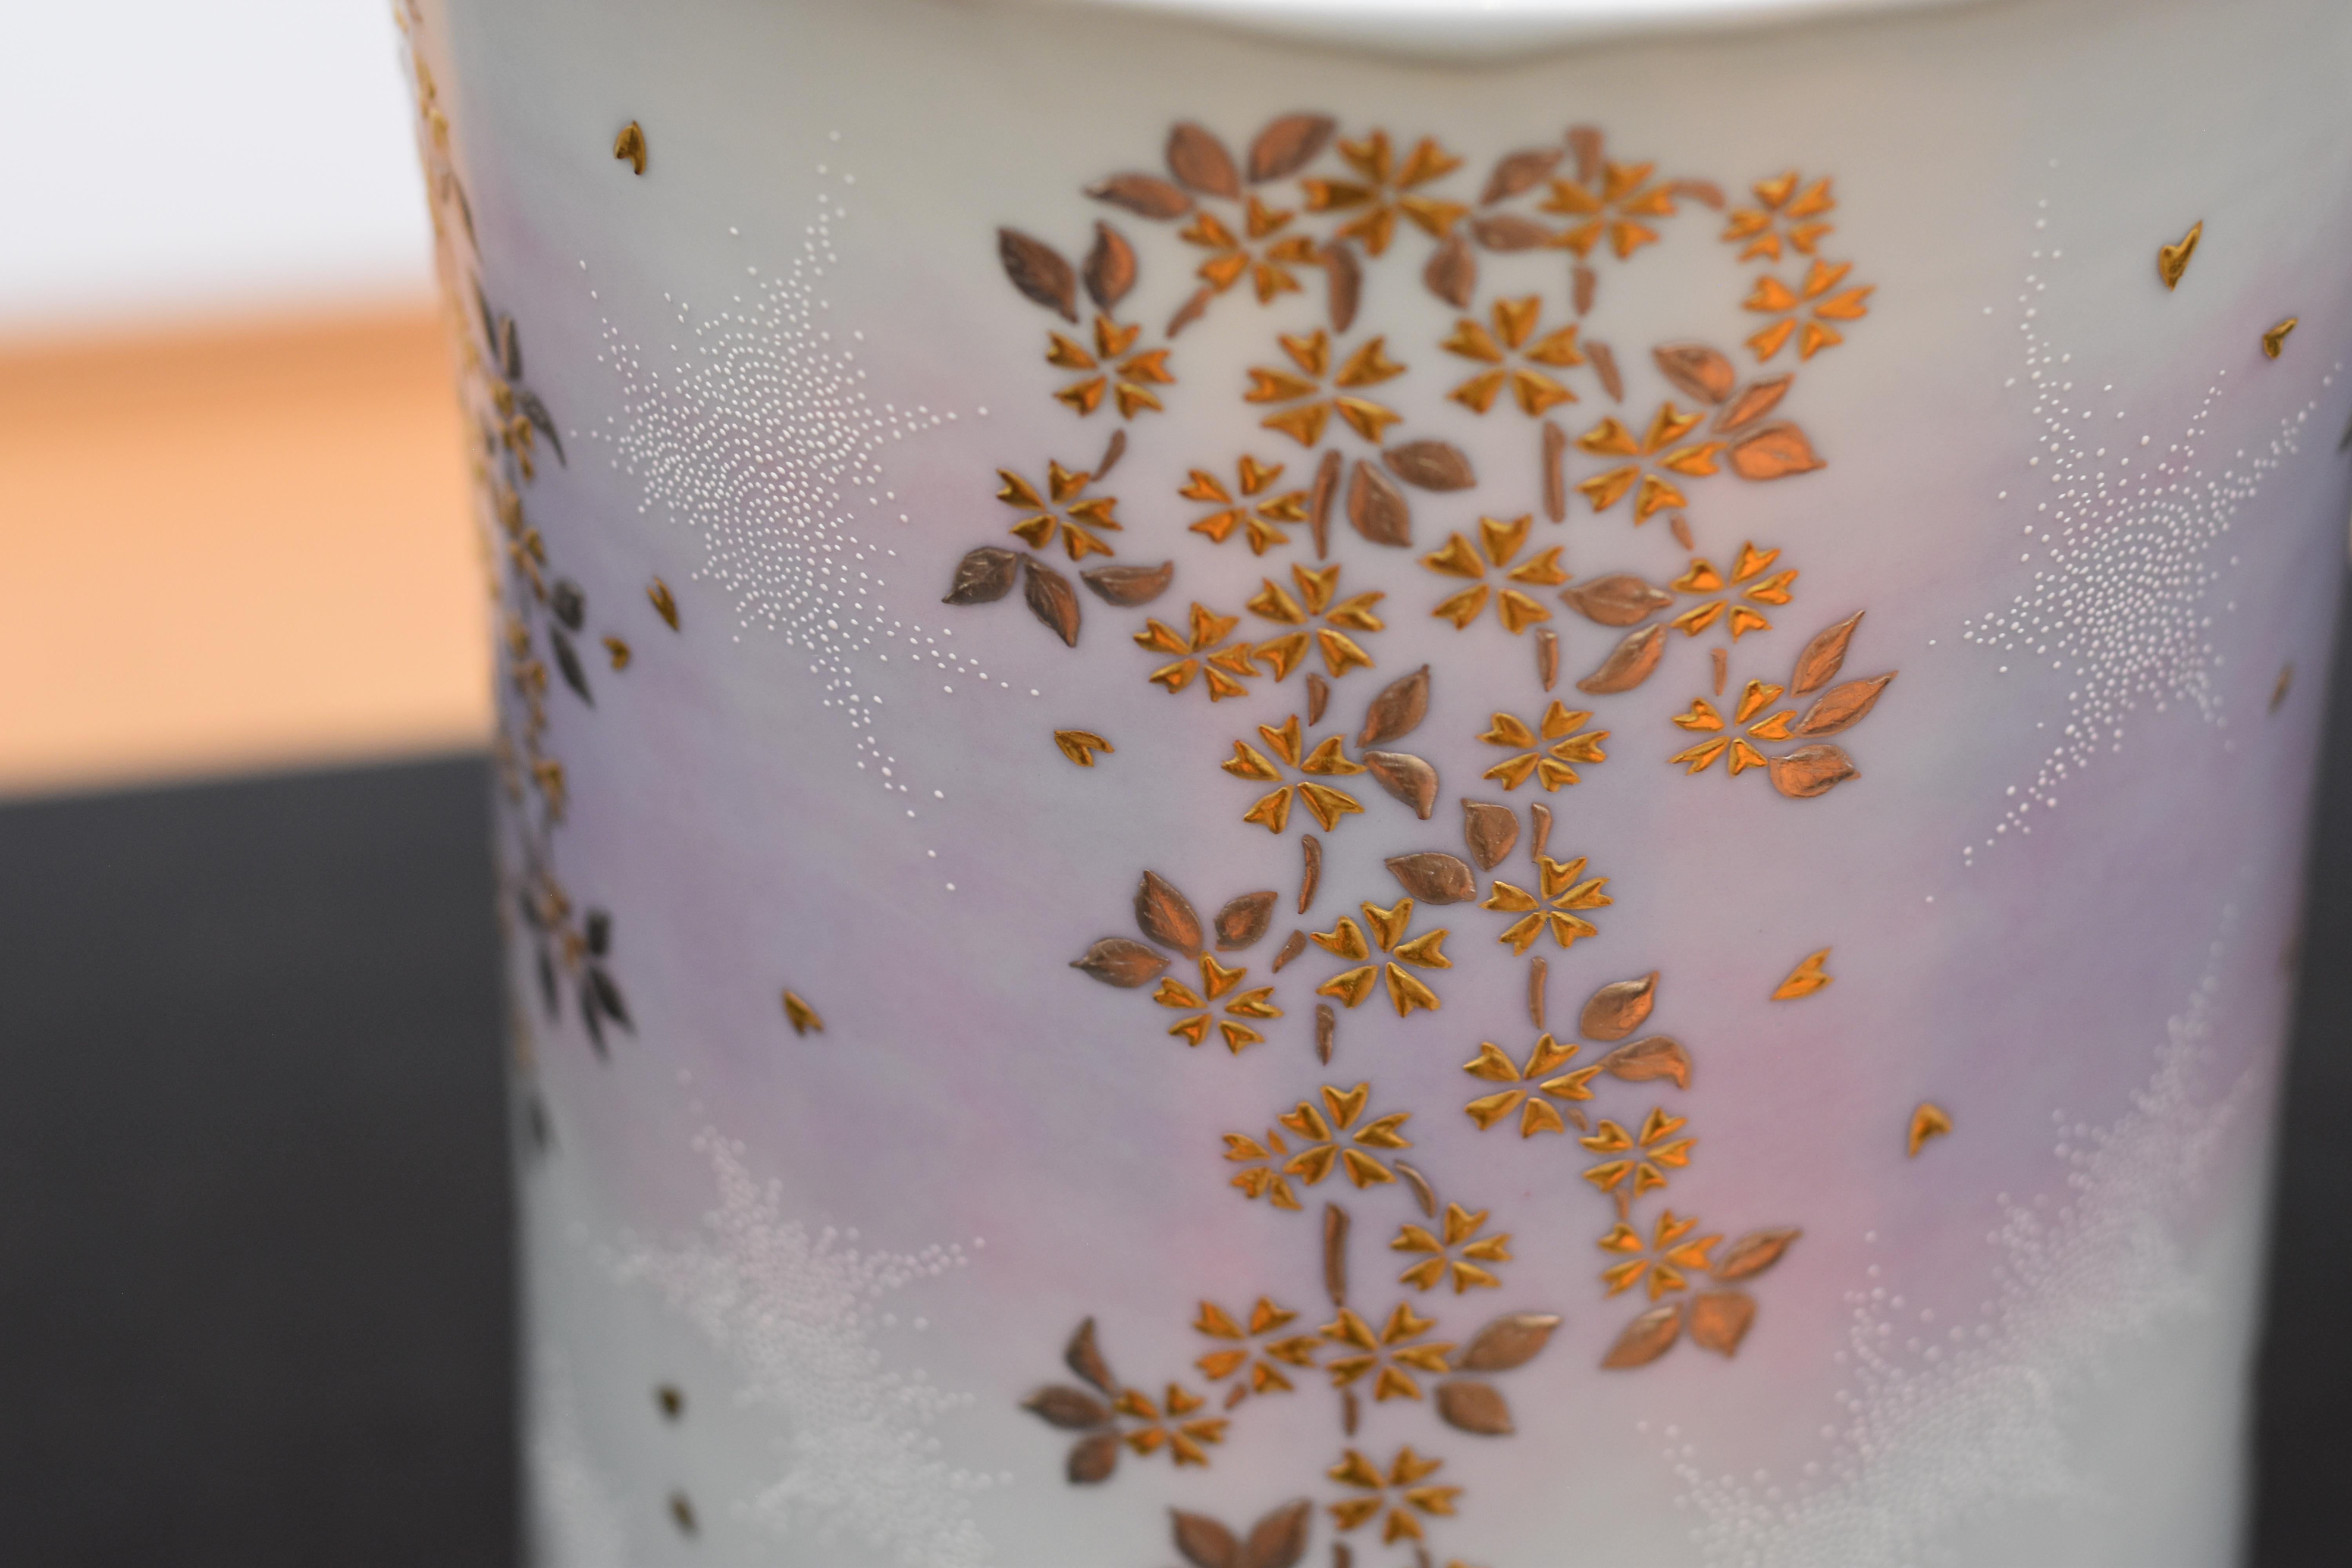 Exquisite museum quality signed Japanese contemporary porcelain vase,  a masterpiece by highly celebrated award-winning third-generation porcelain artist of the Kutani region of Japan featuring a cascade of cherry blossoms rendered in pure gold